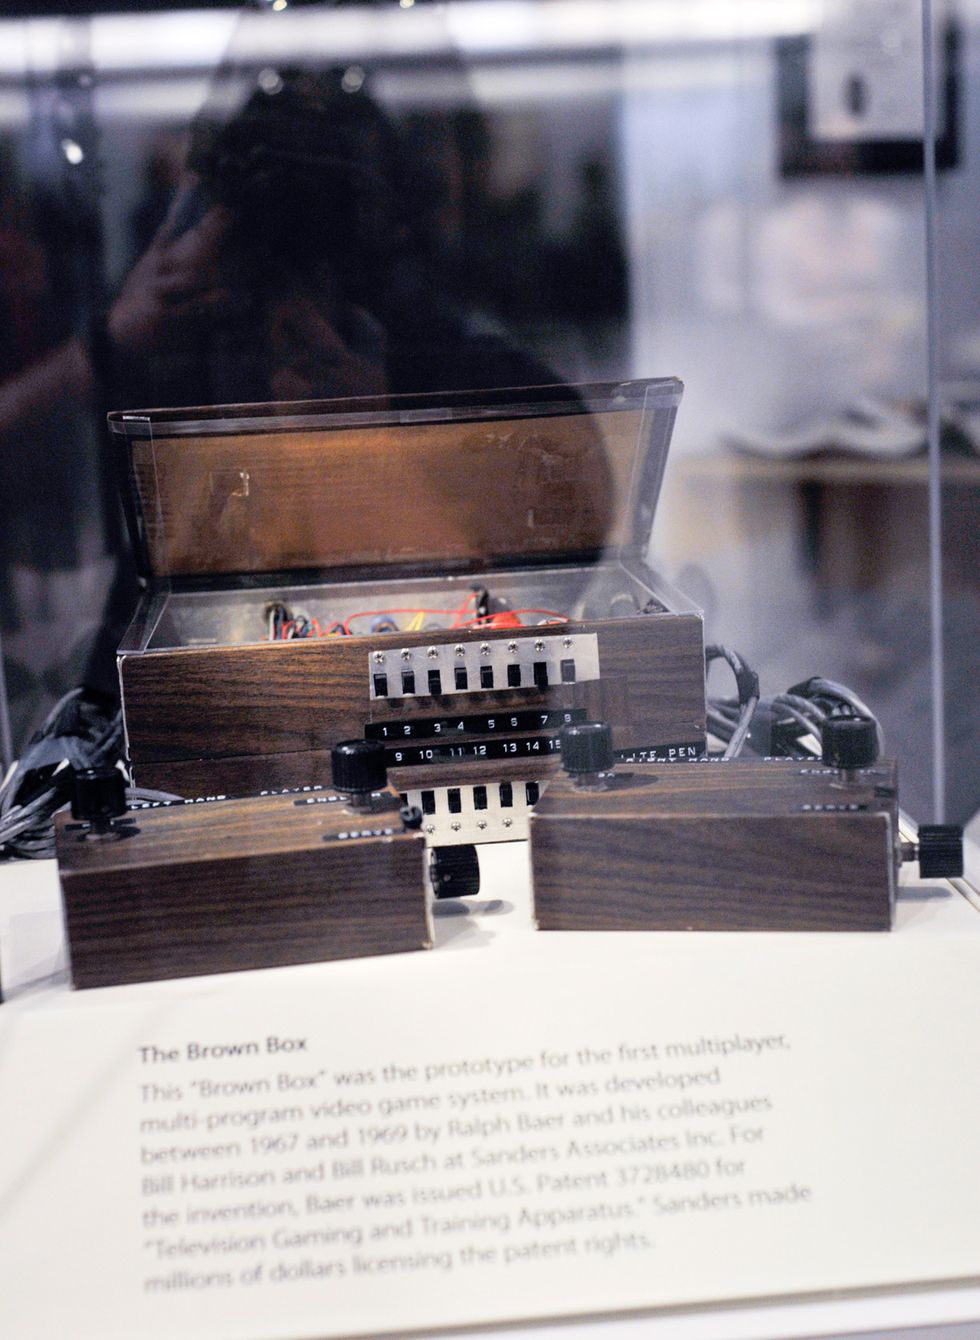 'The Brown Box' on display at the National Museum Of American History's Innovation Wing in Washington DC.